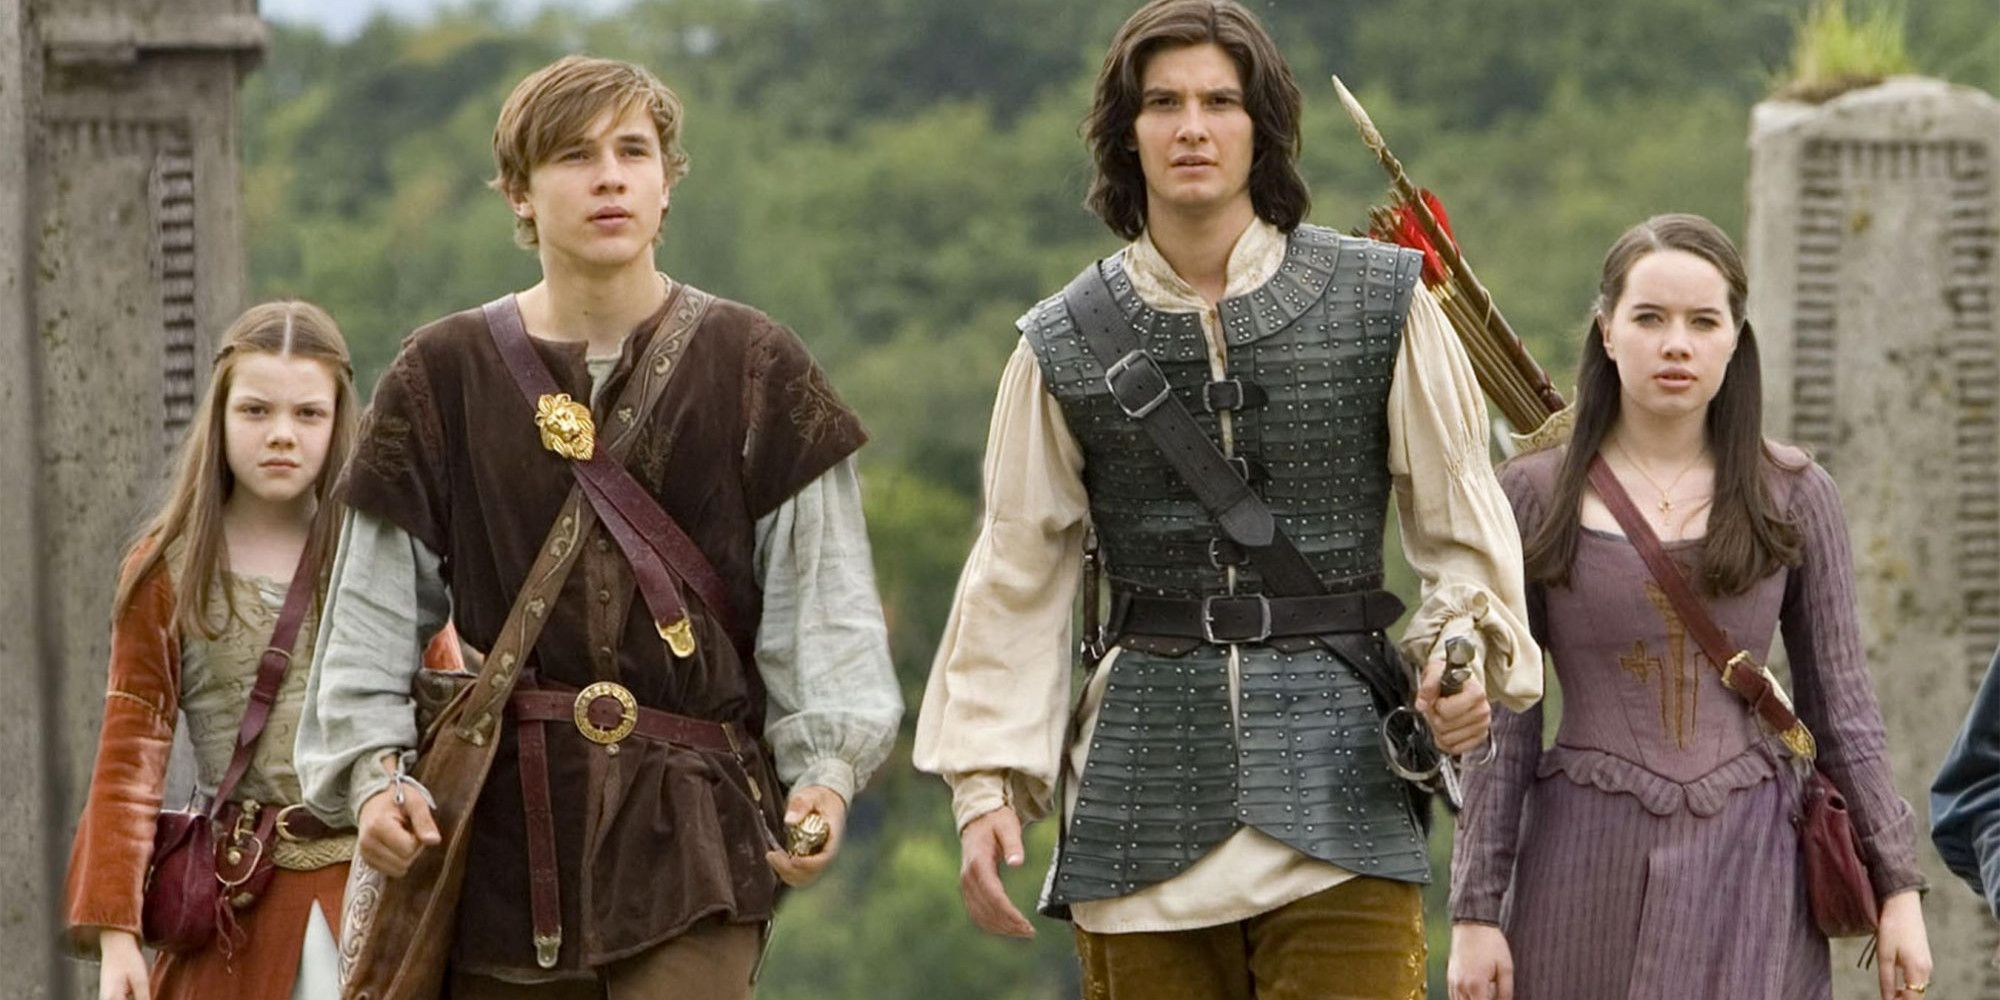 Prince Caspian leads three child warriors into battle in The Chronicles of Narnia: Prince Caspian.